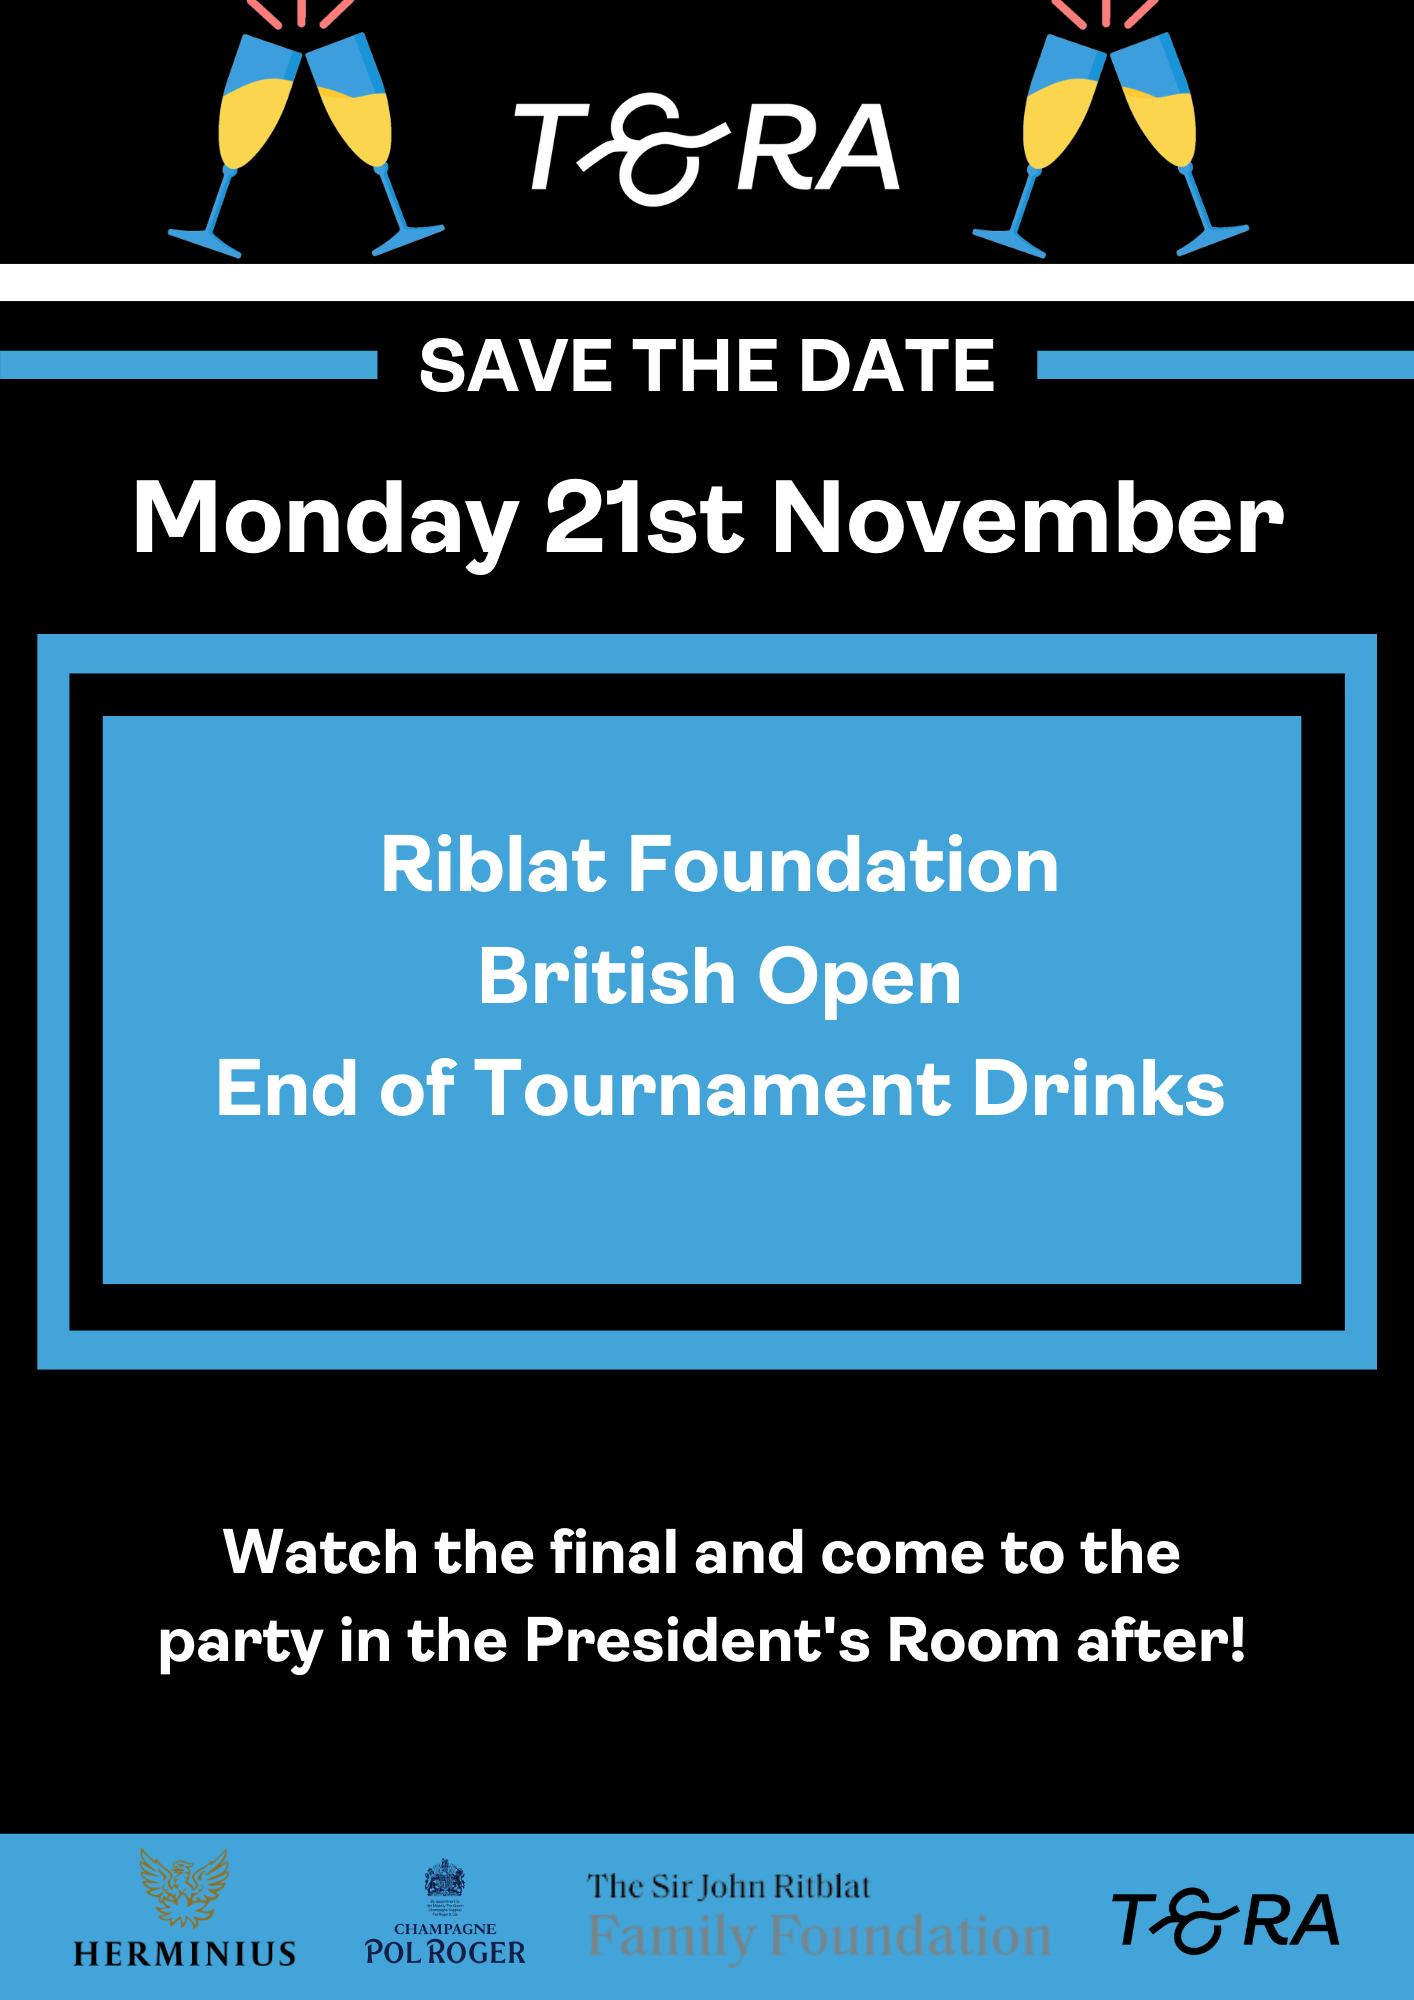 The Ritblat Foundation British Open End of Tournament Drinks